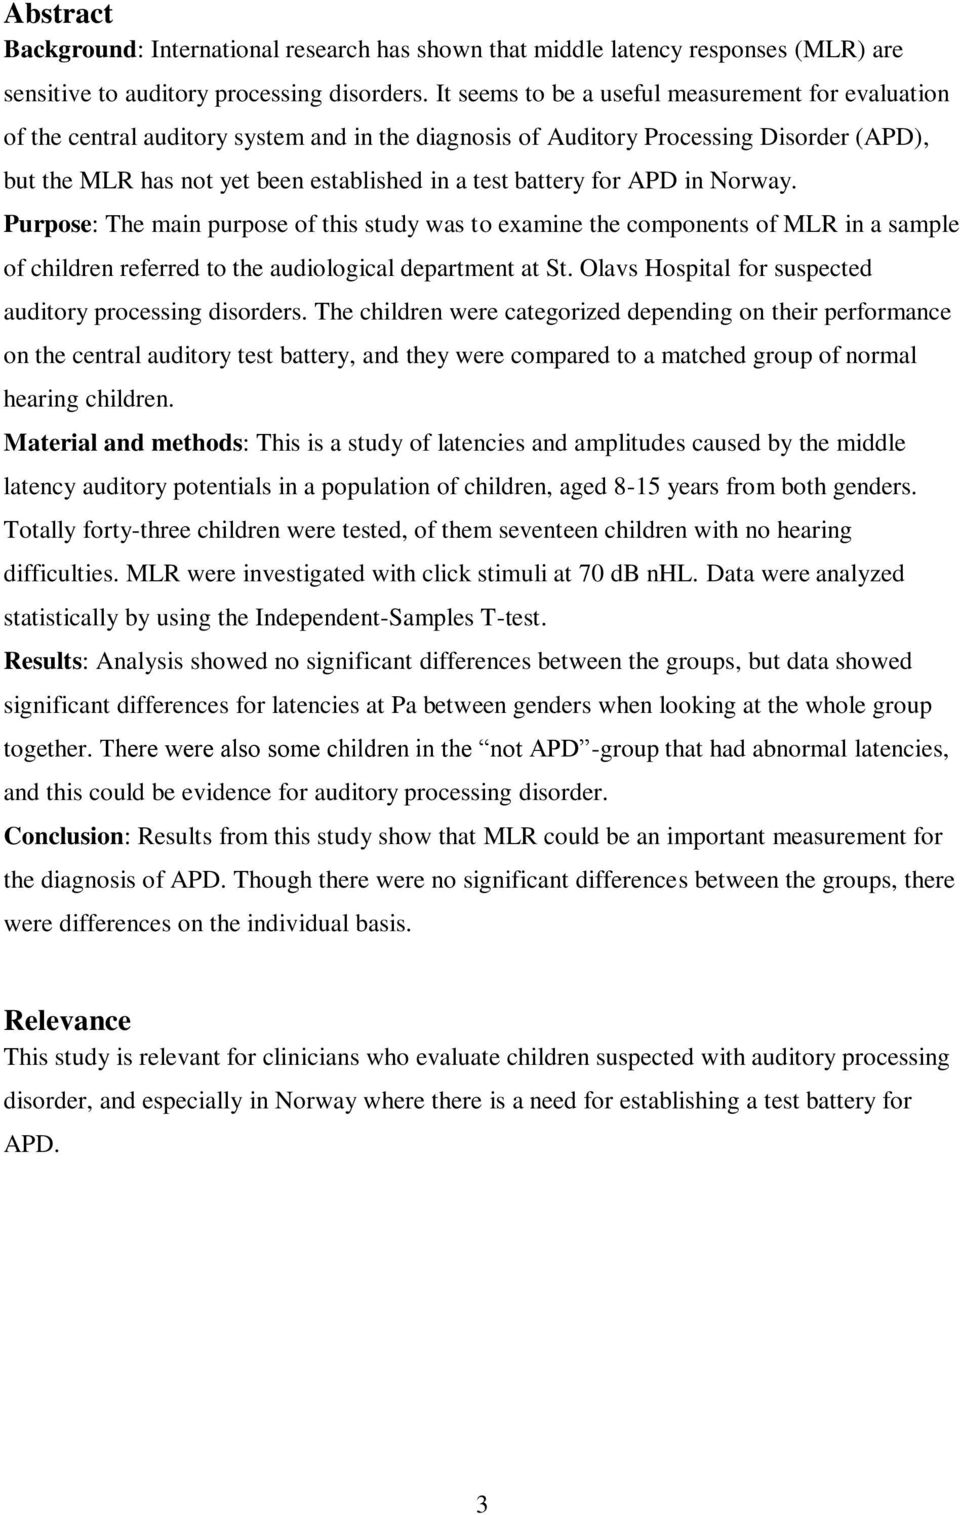 battery for APD in Norway. Purpose: The main purpose of this study was to examine the components of MLR in a sample of children referred to the audiological department at St.